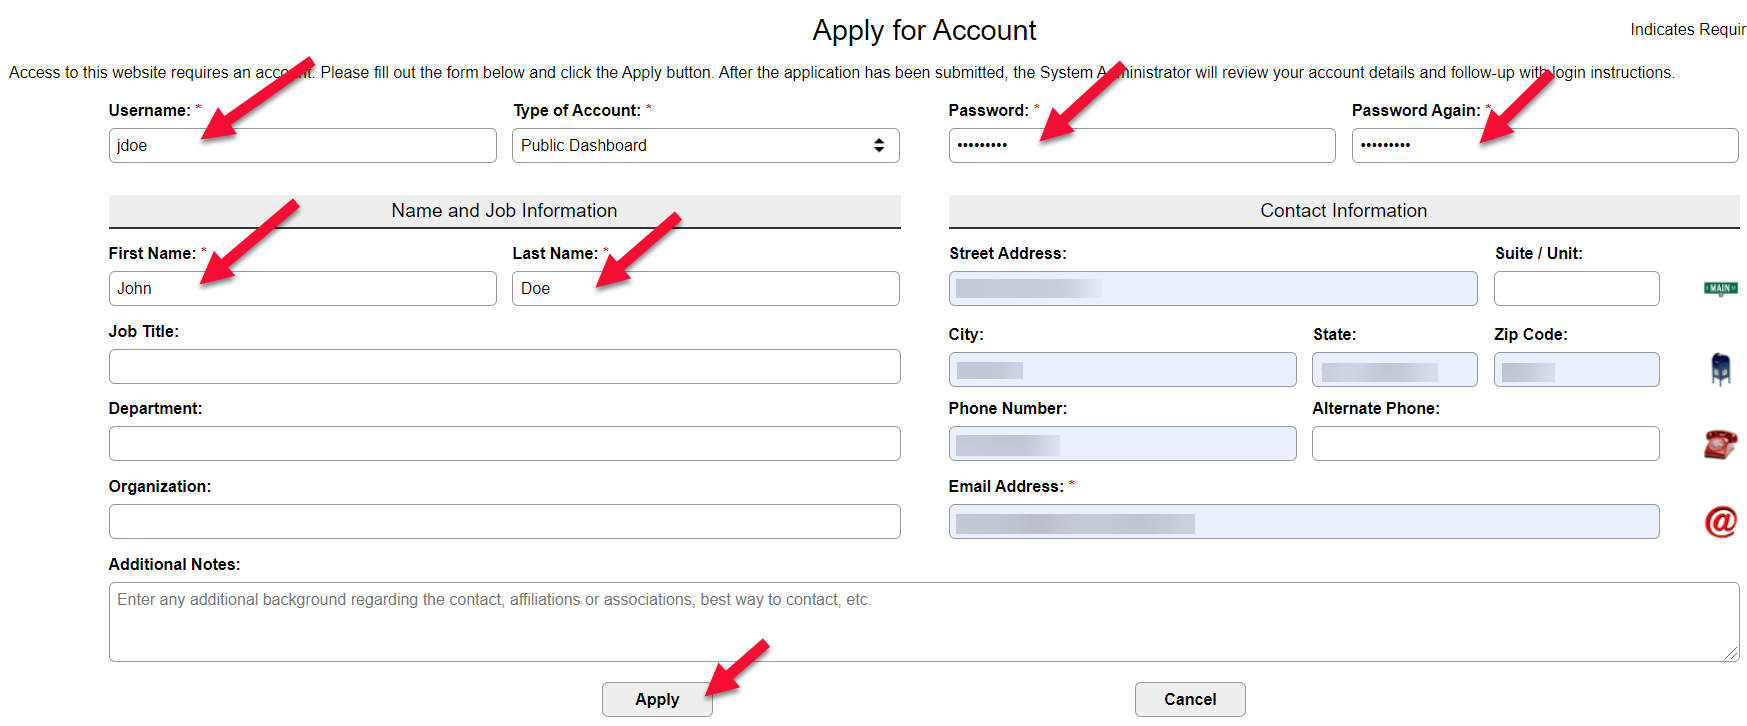 Image of Apply for Account screen to input user information